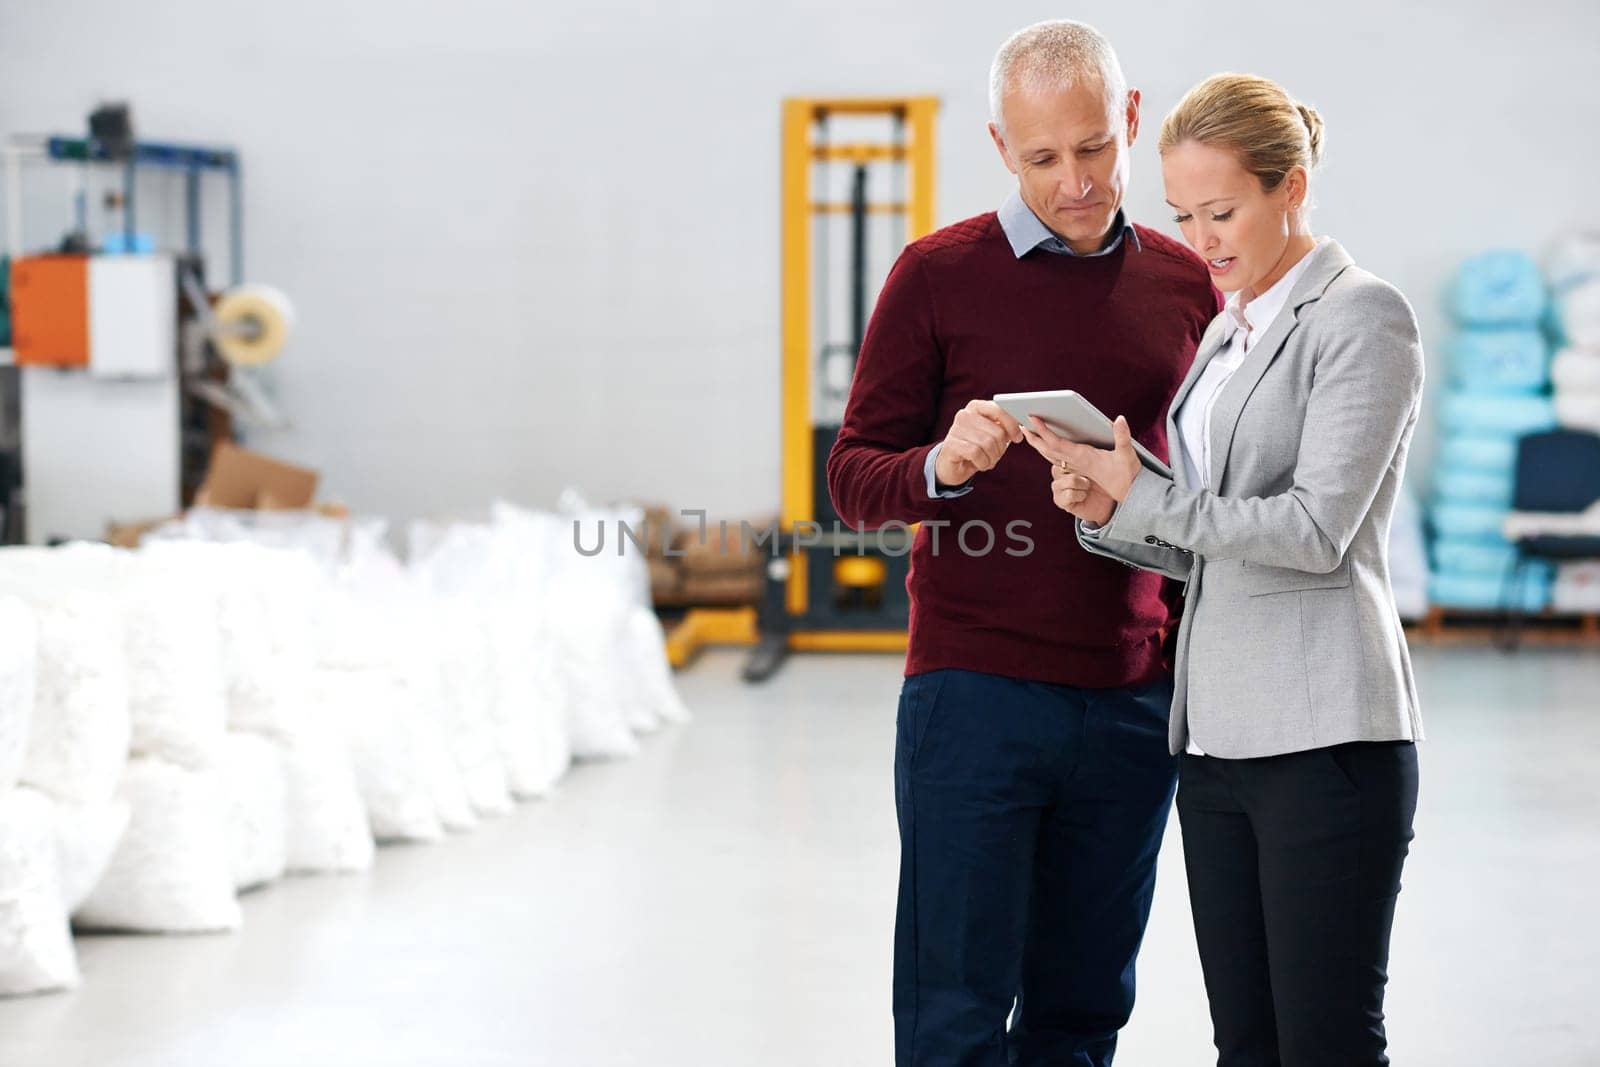 Logistics, warehouse and business people with tablet for teamwork, supply chain and ecommerce. Mature man, woman and discussion with digital technology for planning, communication or conversation.